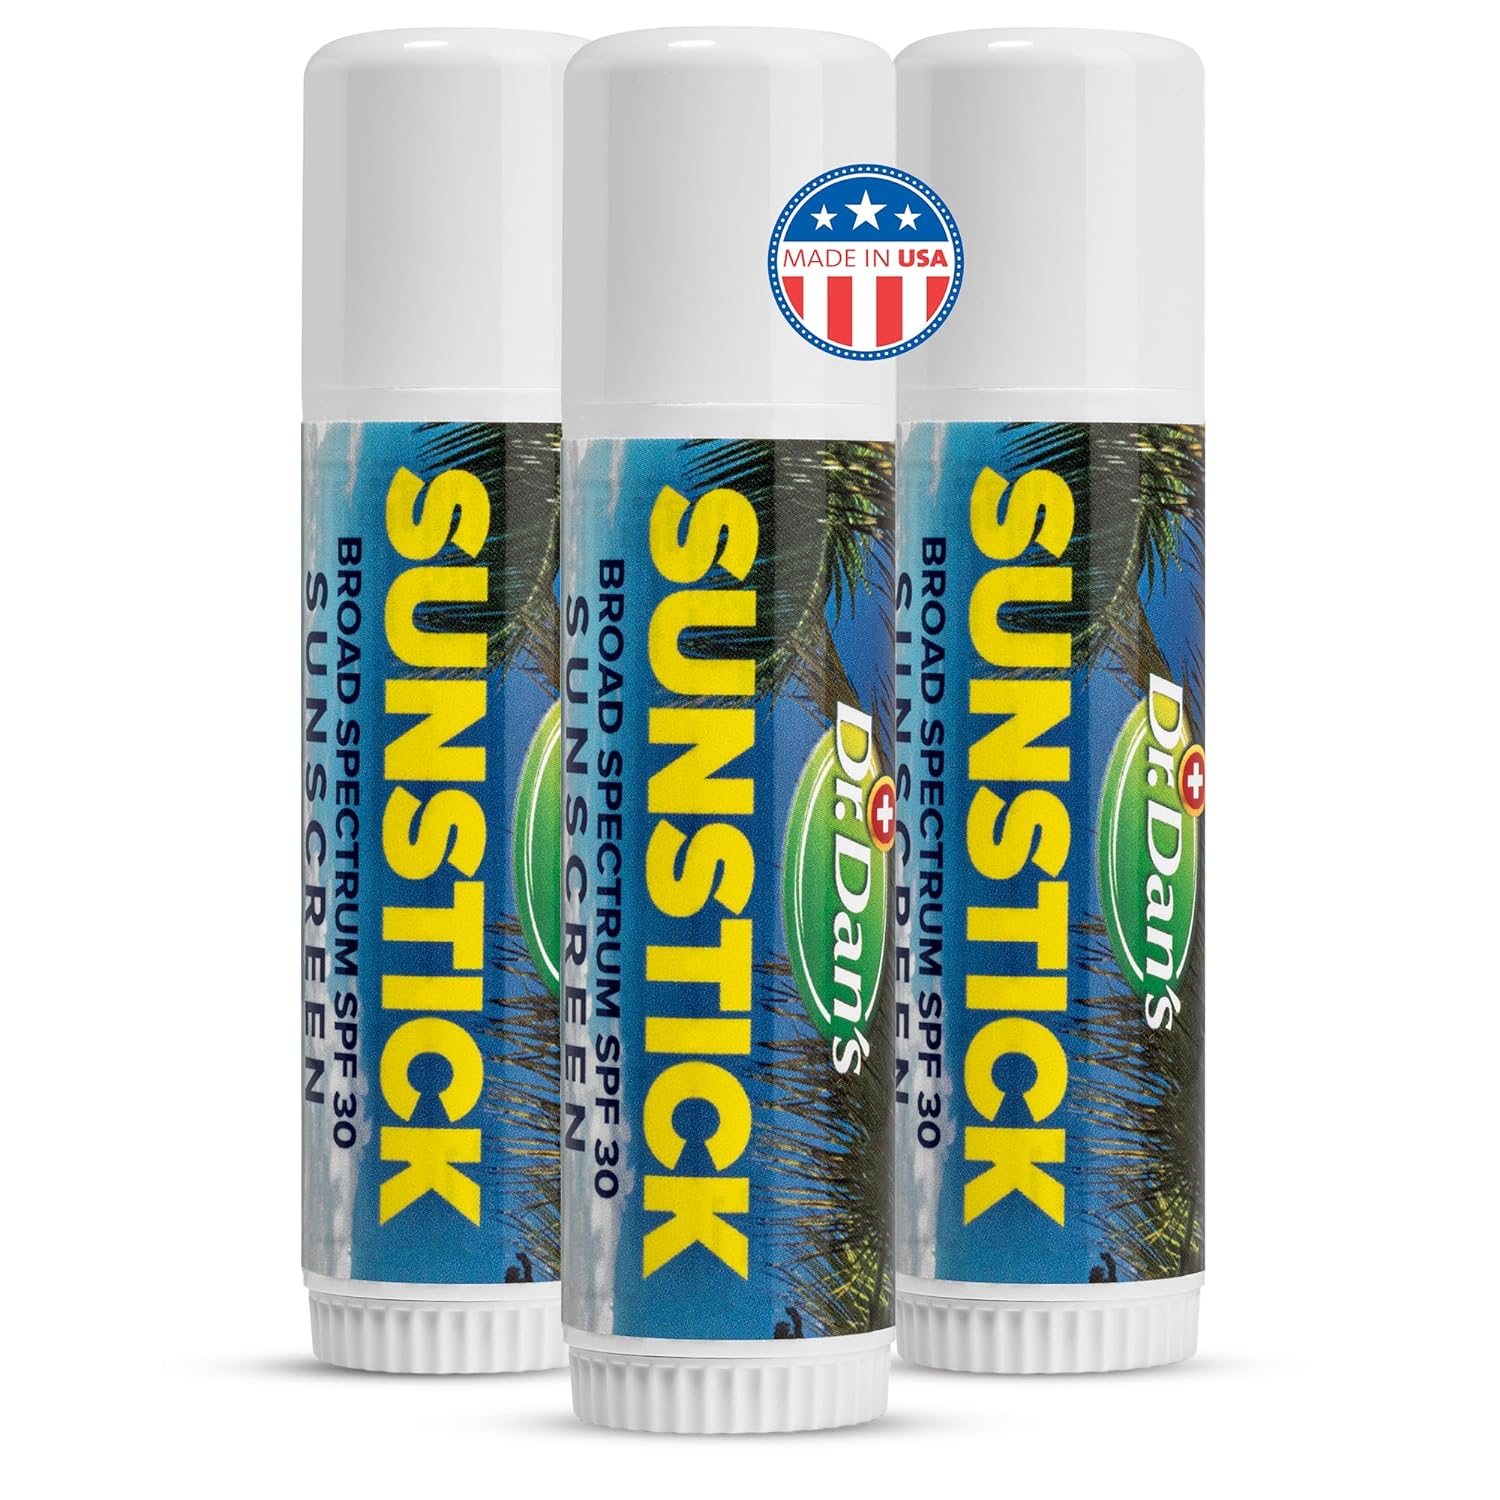 Dr. Dan's Sunstick - 3 Pack - Mineral Based Sunscreen for Face and Body SPF 30